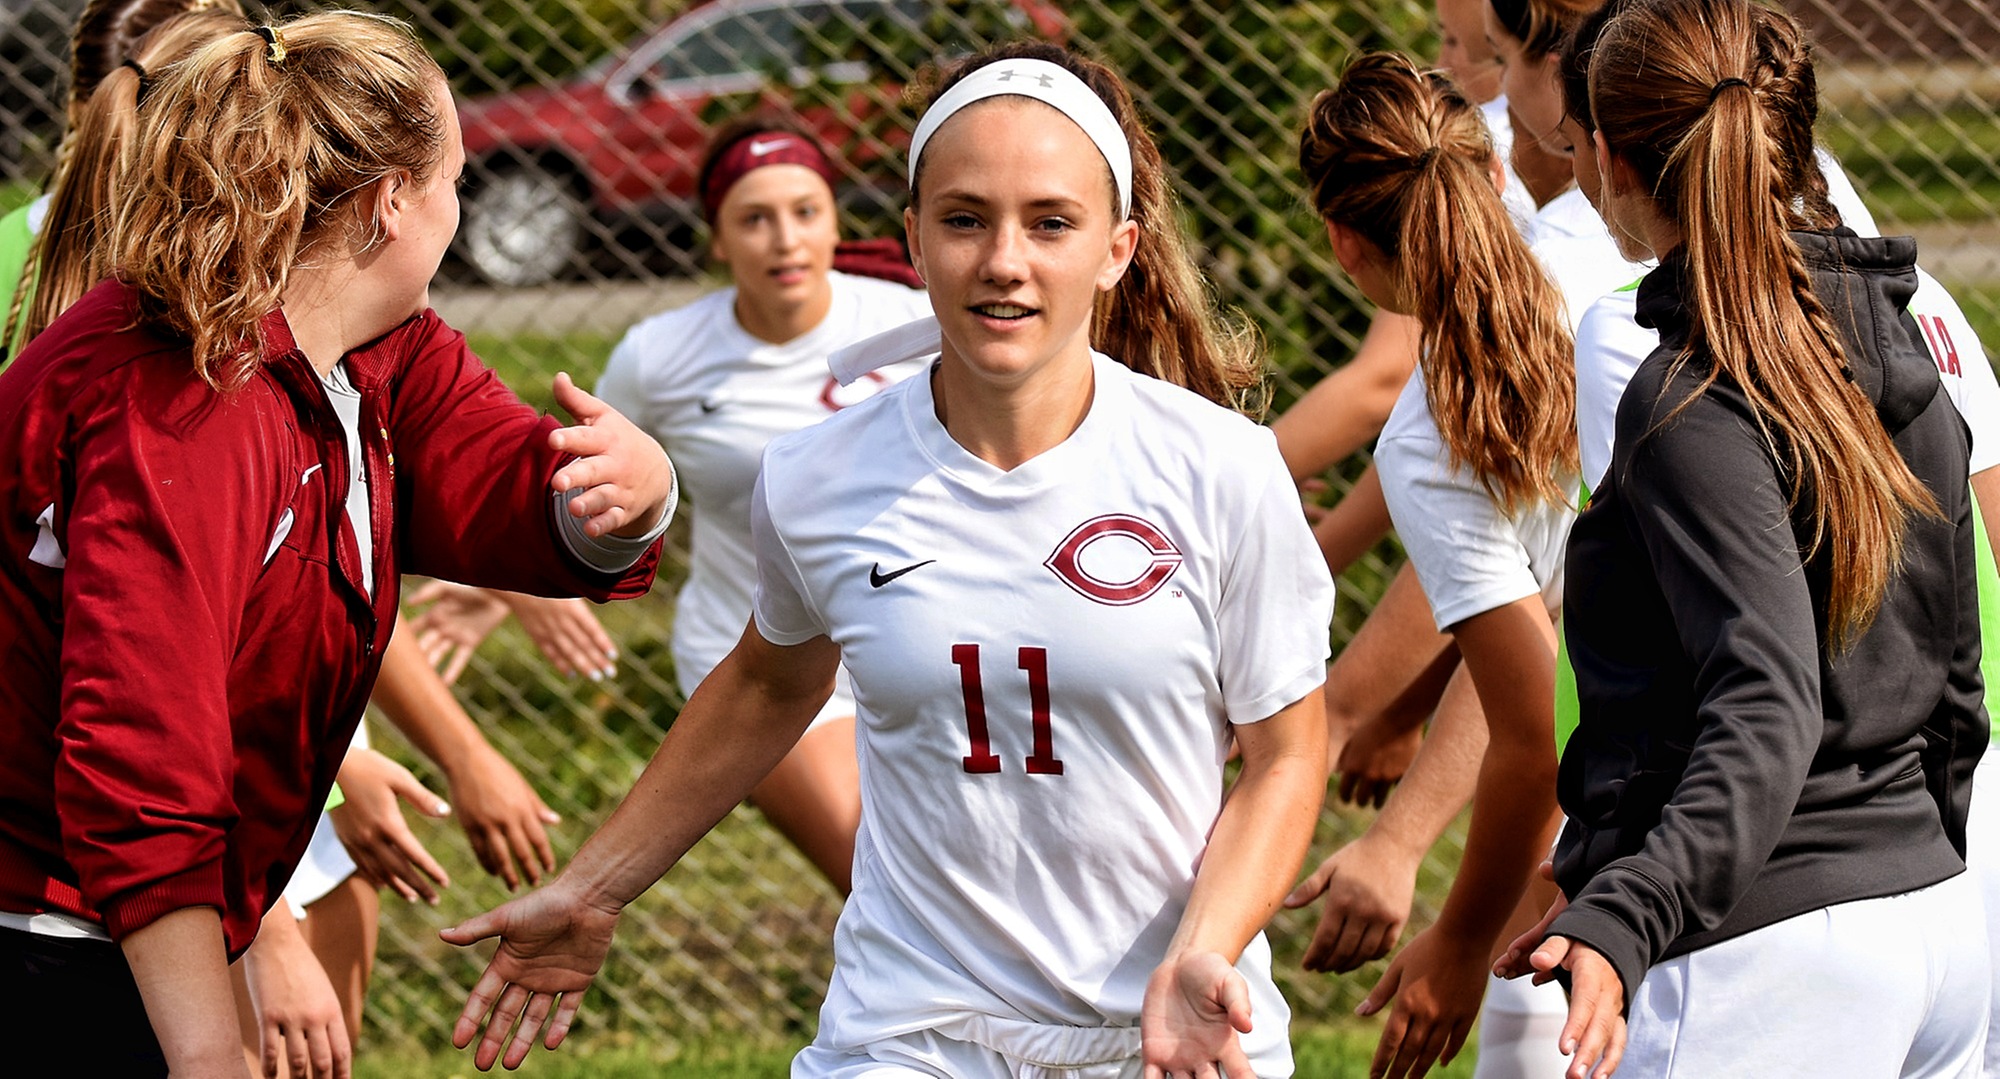 Senior Karsen Granning scored three goals to help the Cobbers to a 4-0 win over Northland.